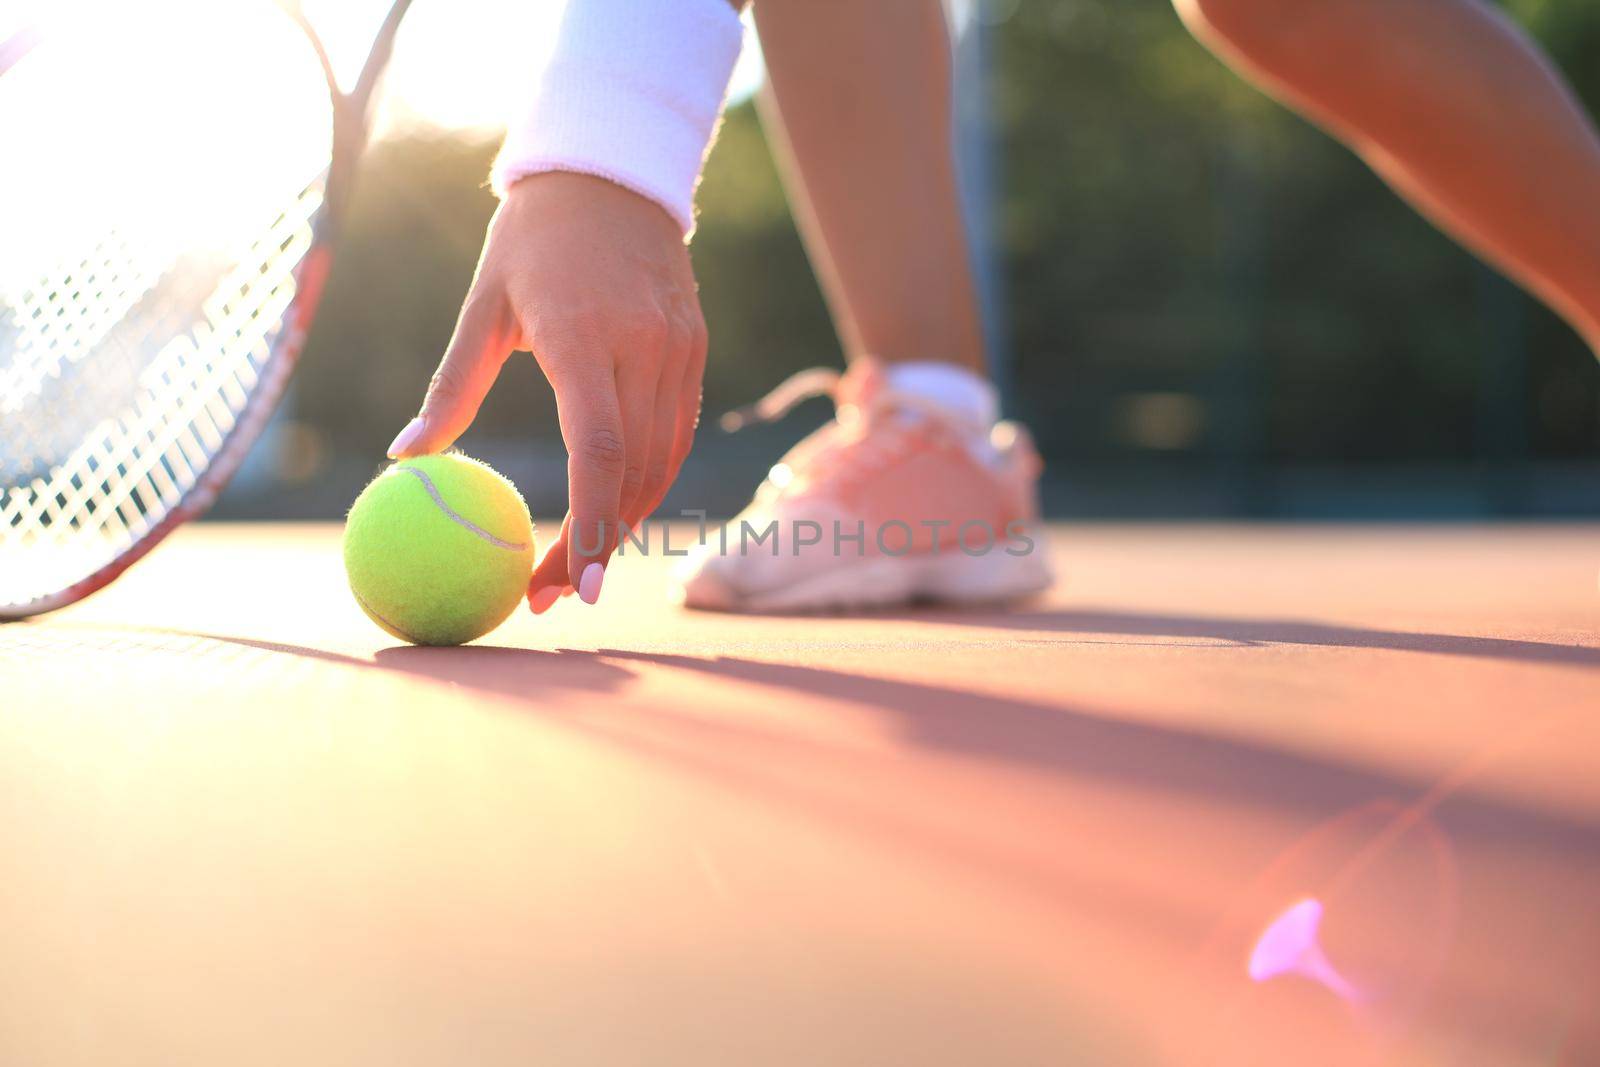 Tennis player raises a tennis ball from the clay court during the game. by tsyhun